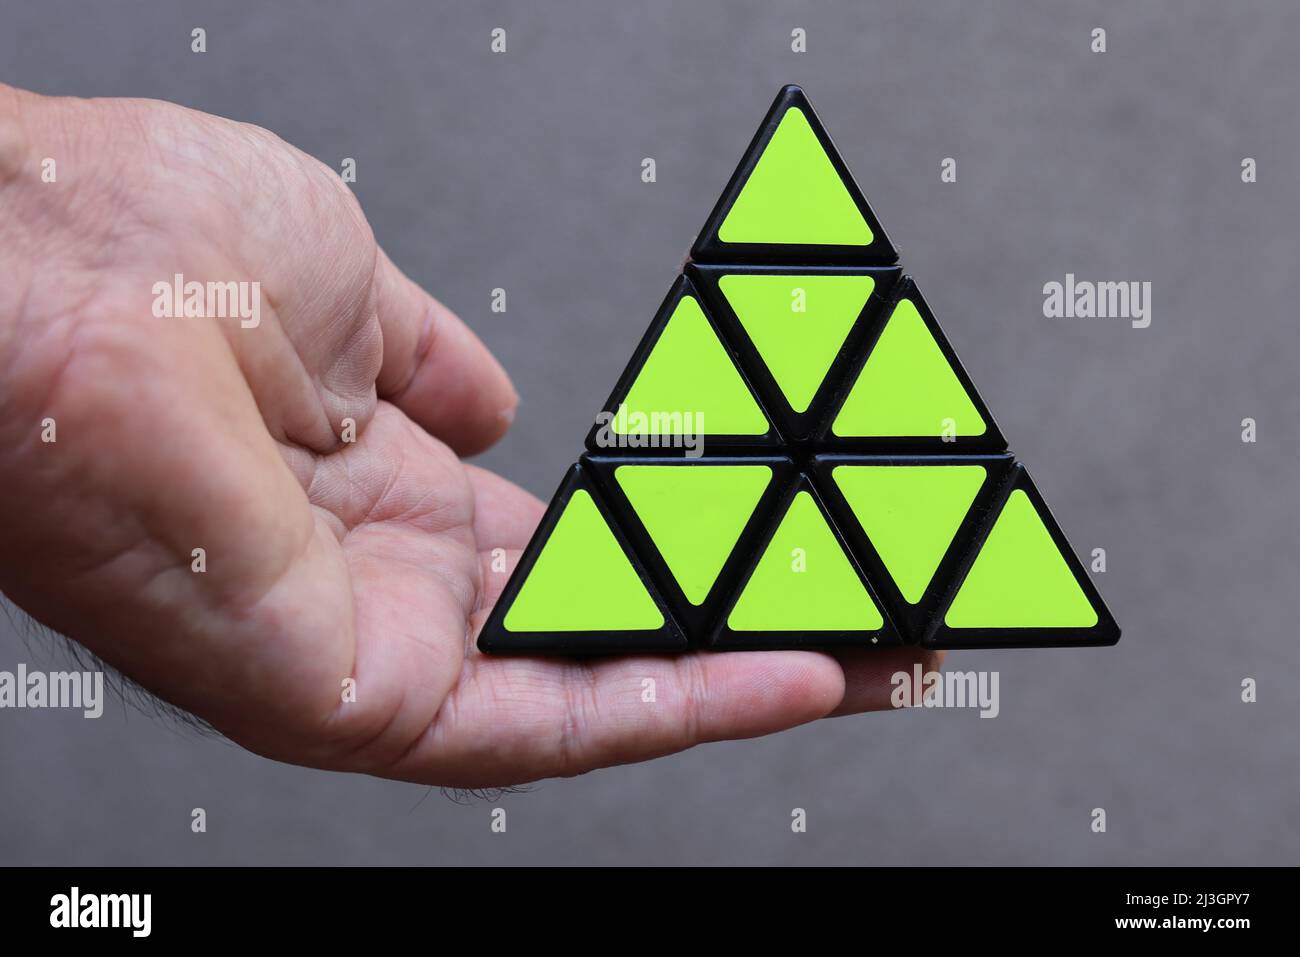 A puzzle in the shape of a triangle in a hand Stock Photo